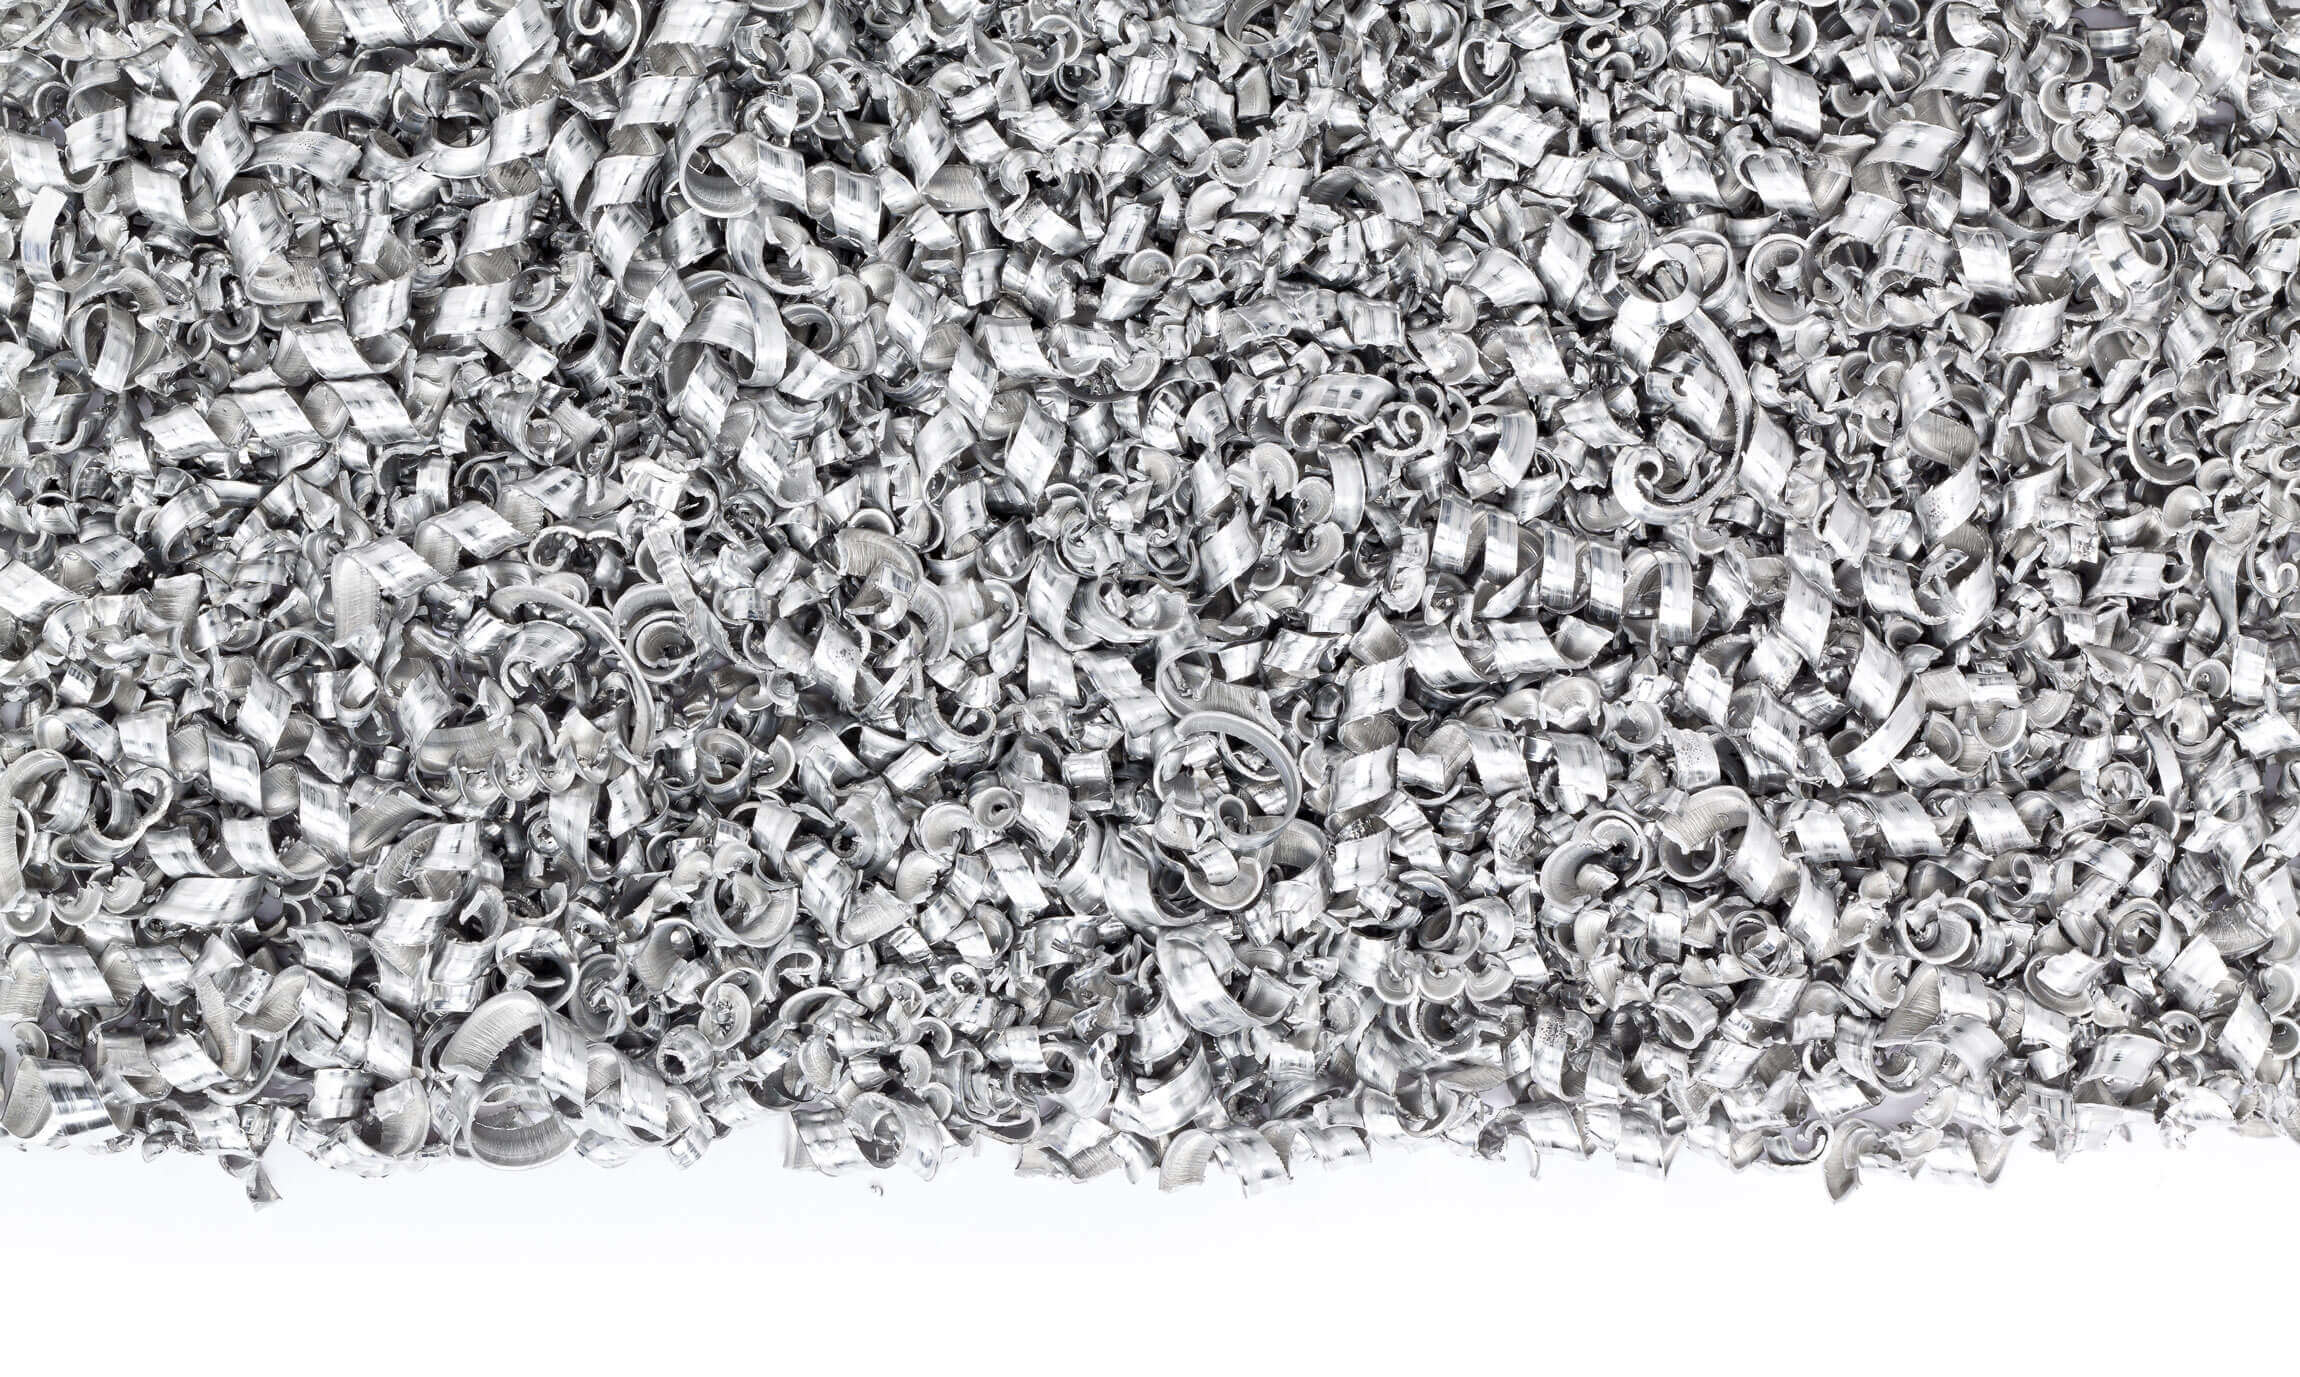 aluminum chips from metal processing machine